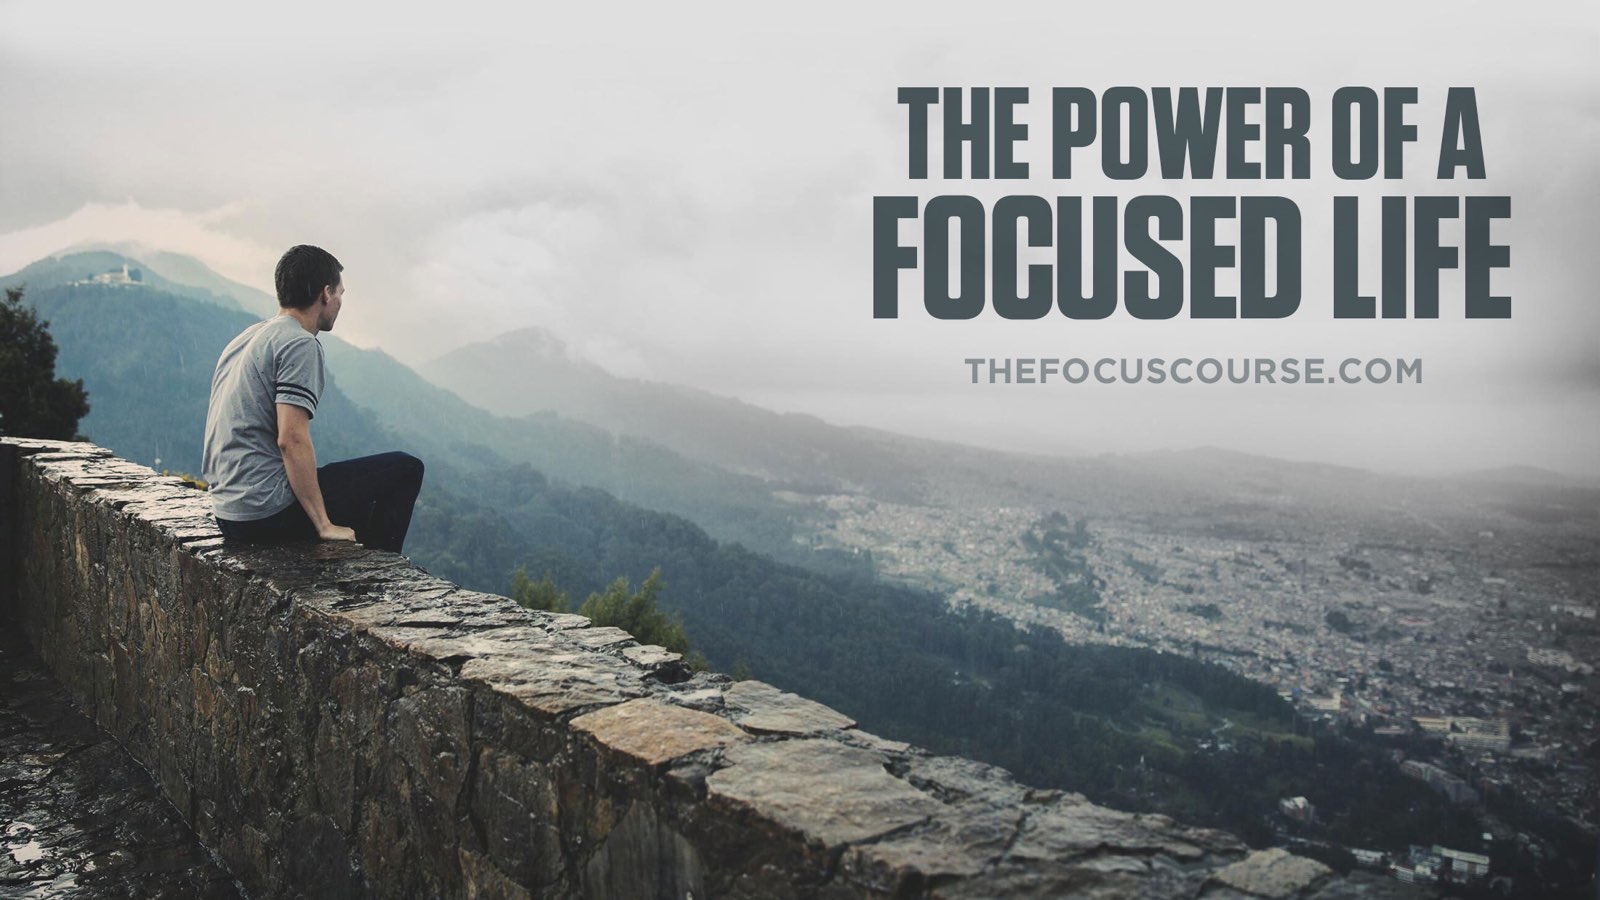 Life site. The Power of Focus: Debunking success Myths | Gary Keller's Insights. Focus on. Focused on him. The Power of focusing on one thing.